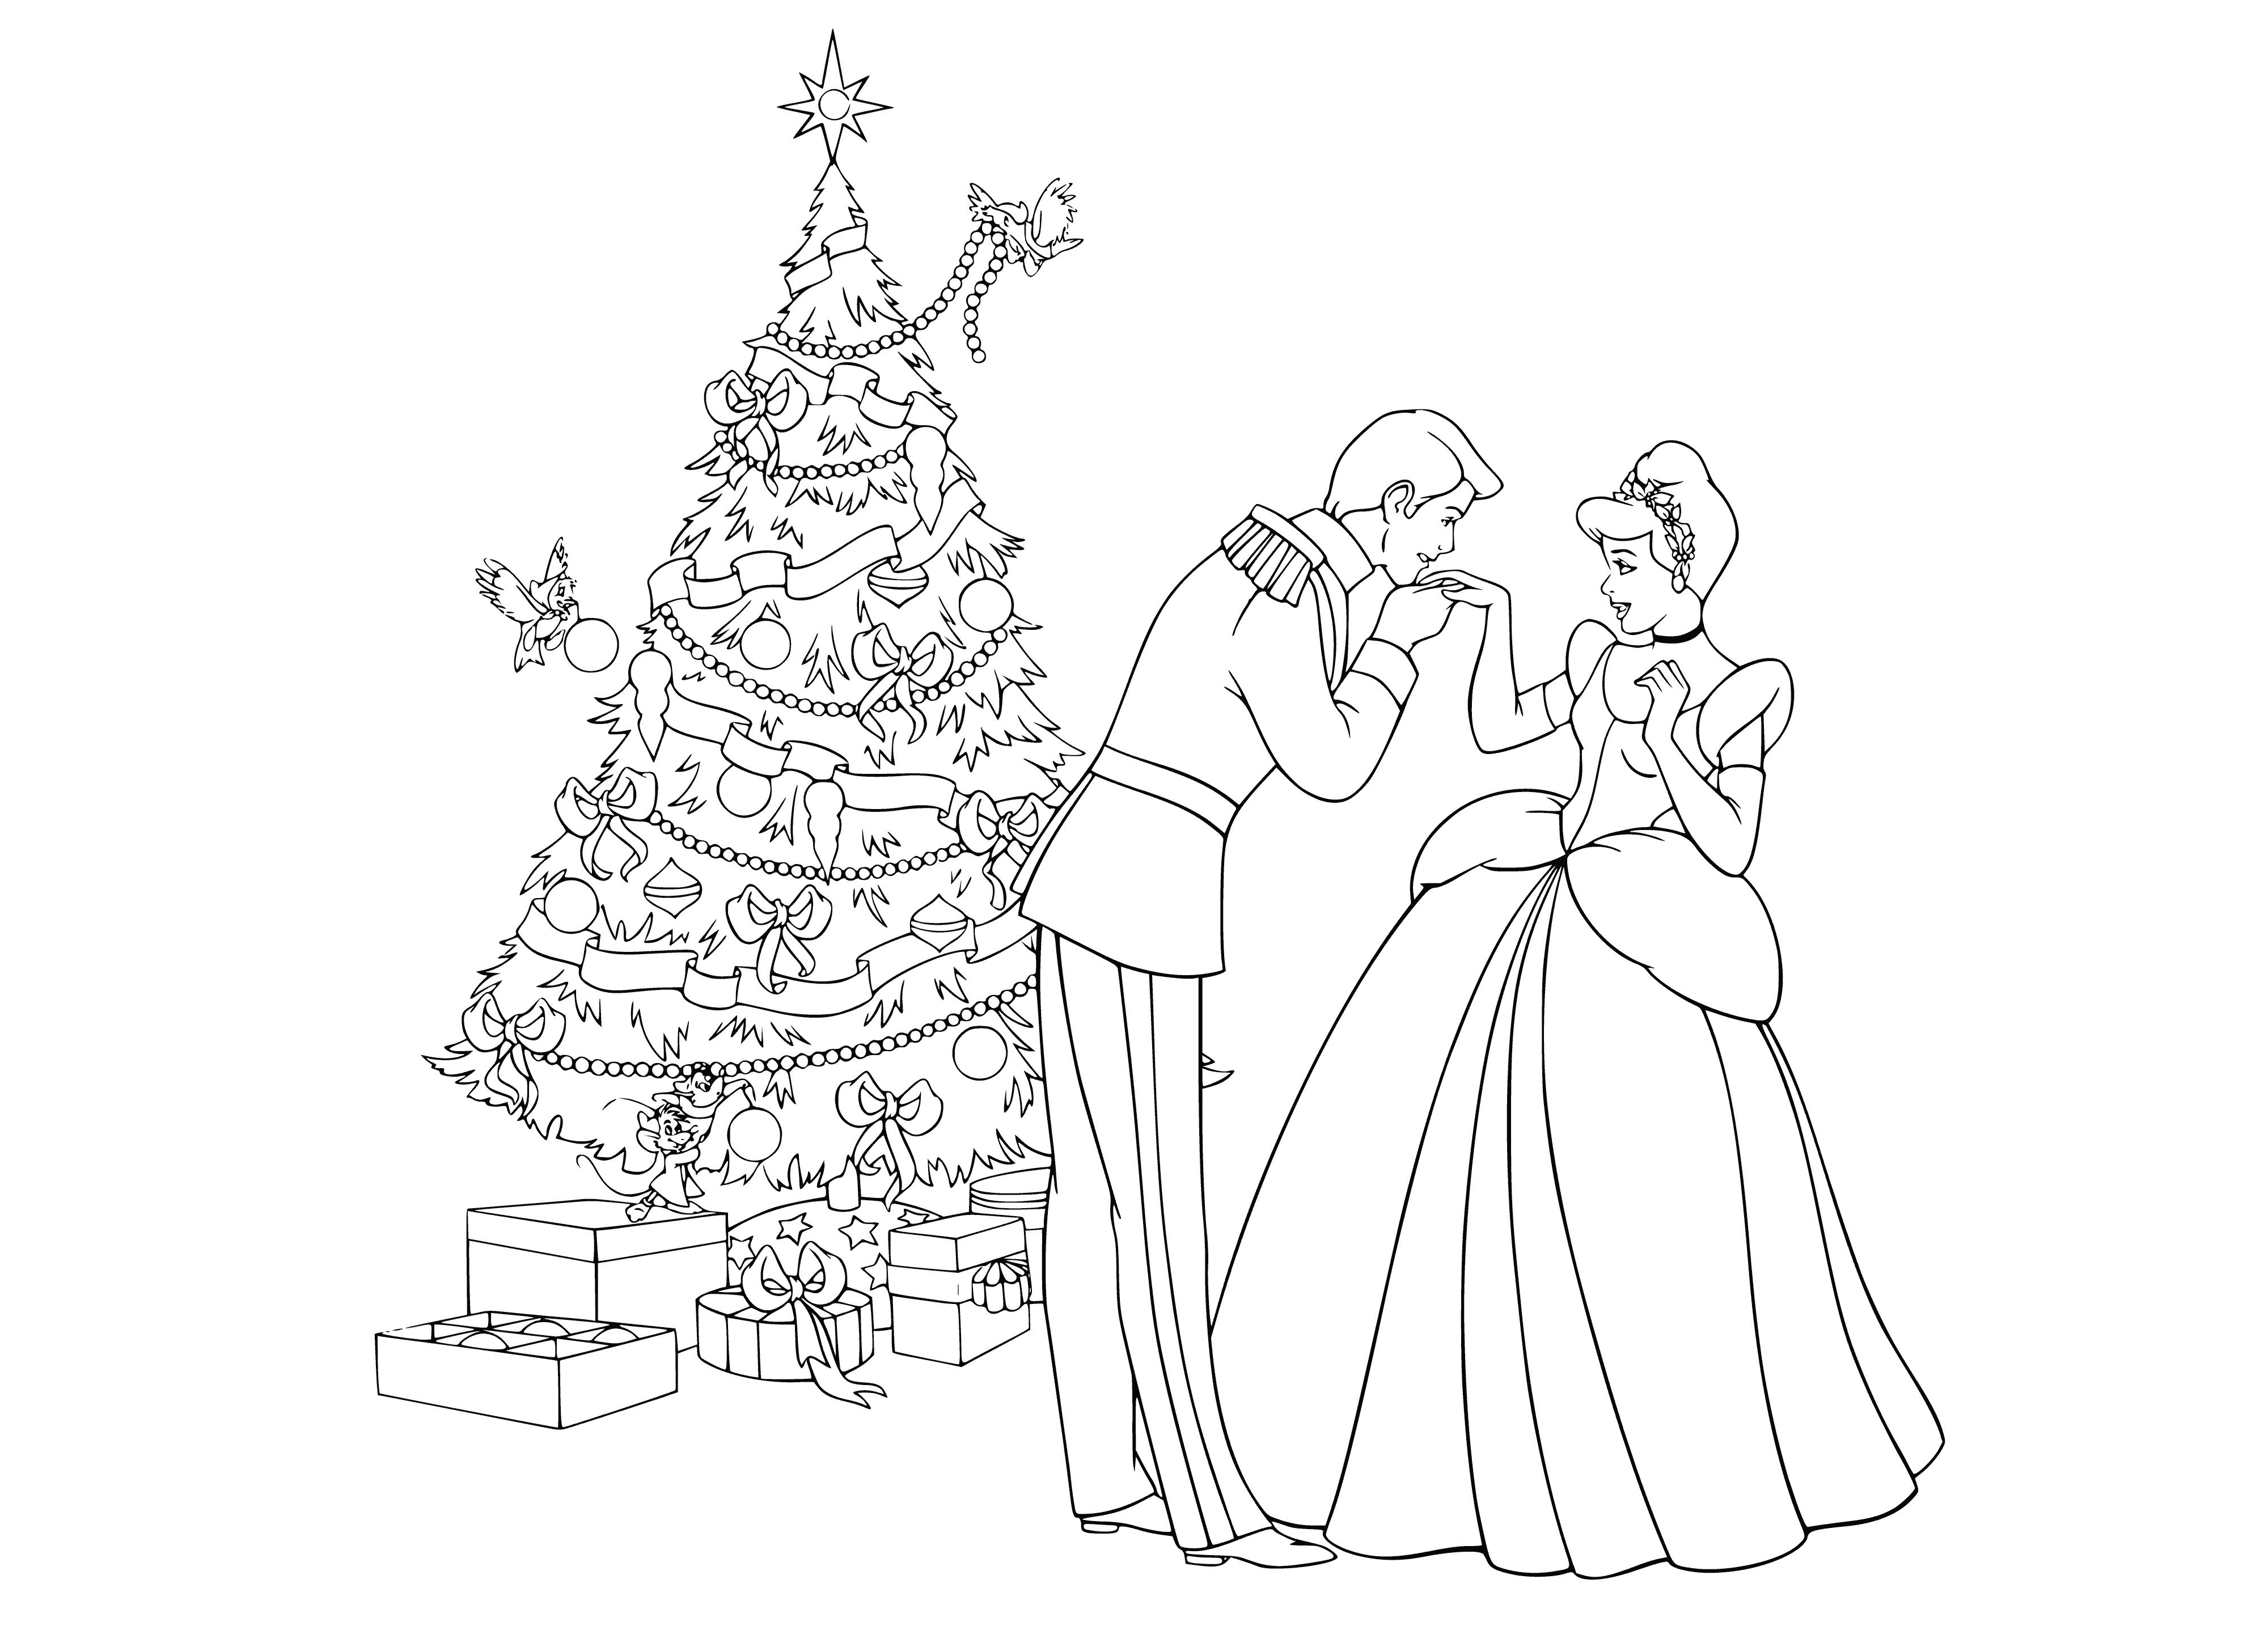 coloring page: Cinderella and prince kiss under the mistletoe to mark the start of the New Year.